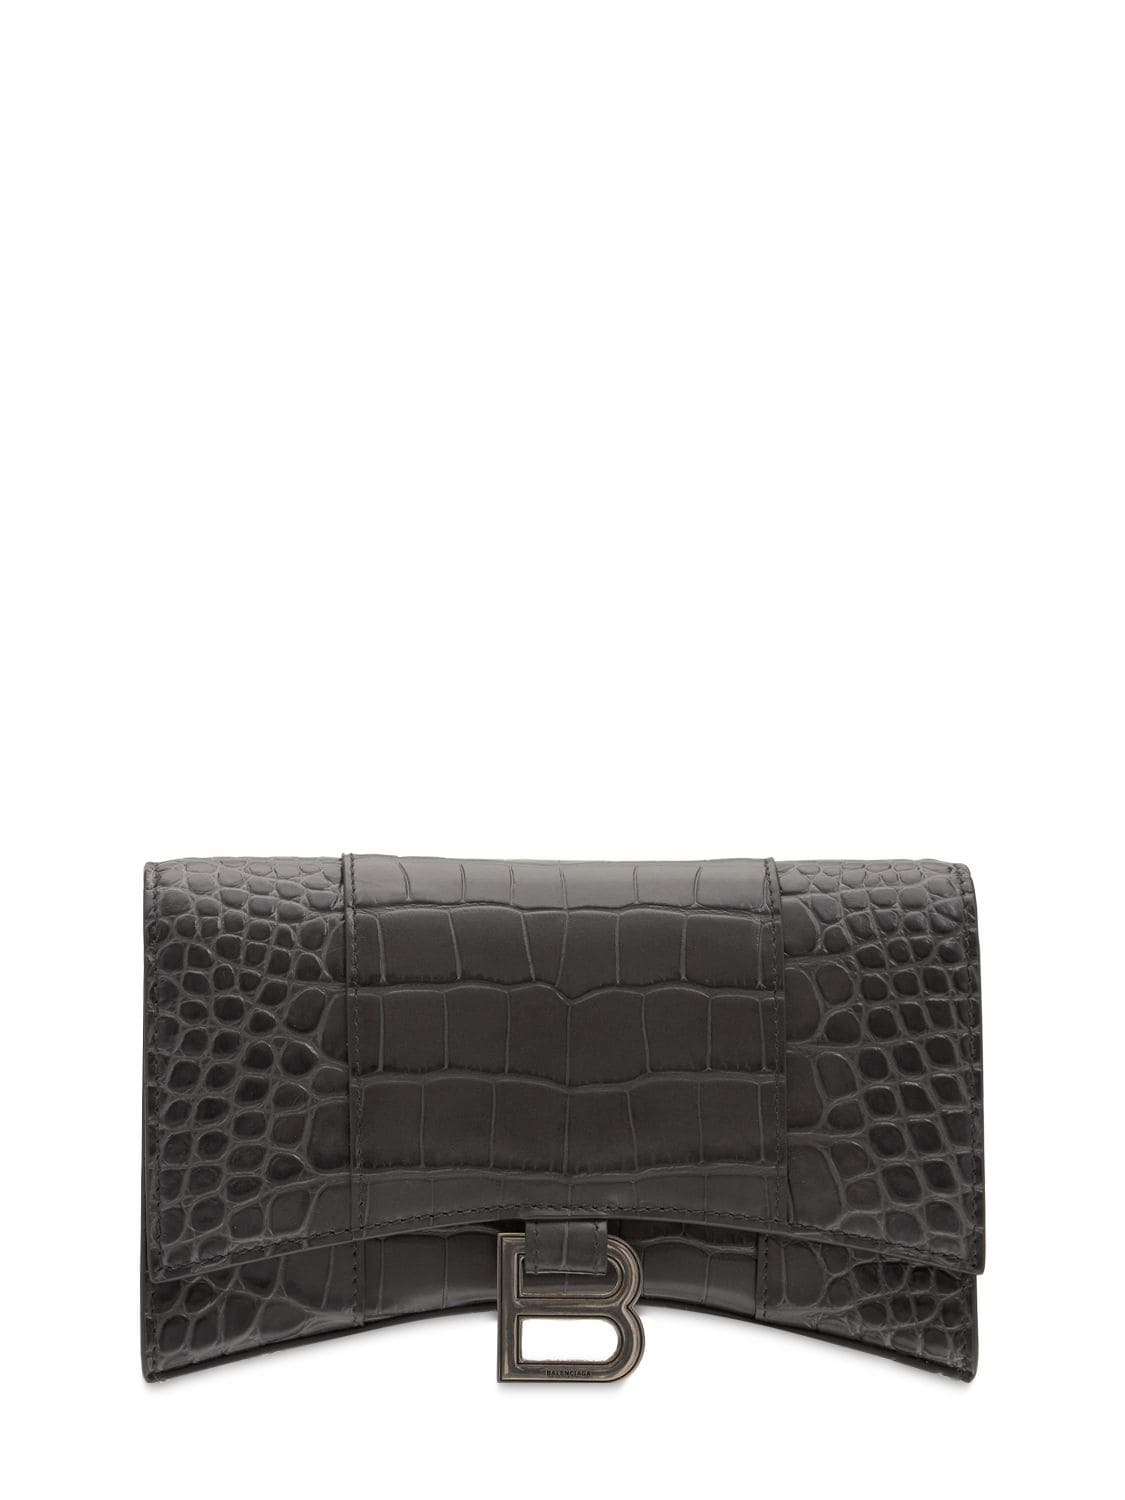 genstand Tilskyndelse Overskyet Balenciaga Hourglass Embossed Leather Chain Wallet In Dark Grey | ModeSens